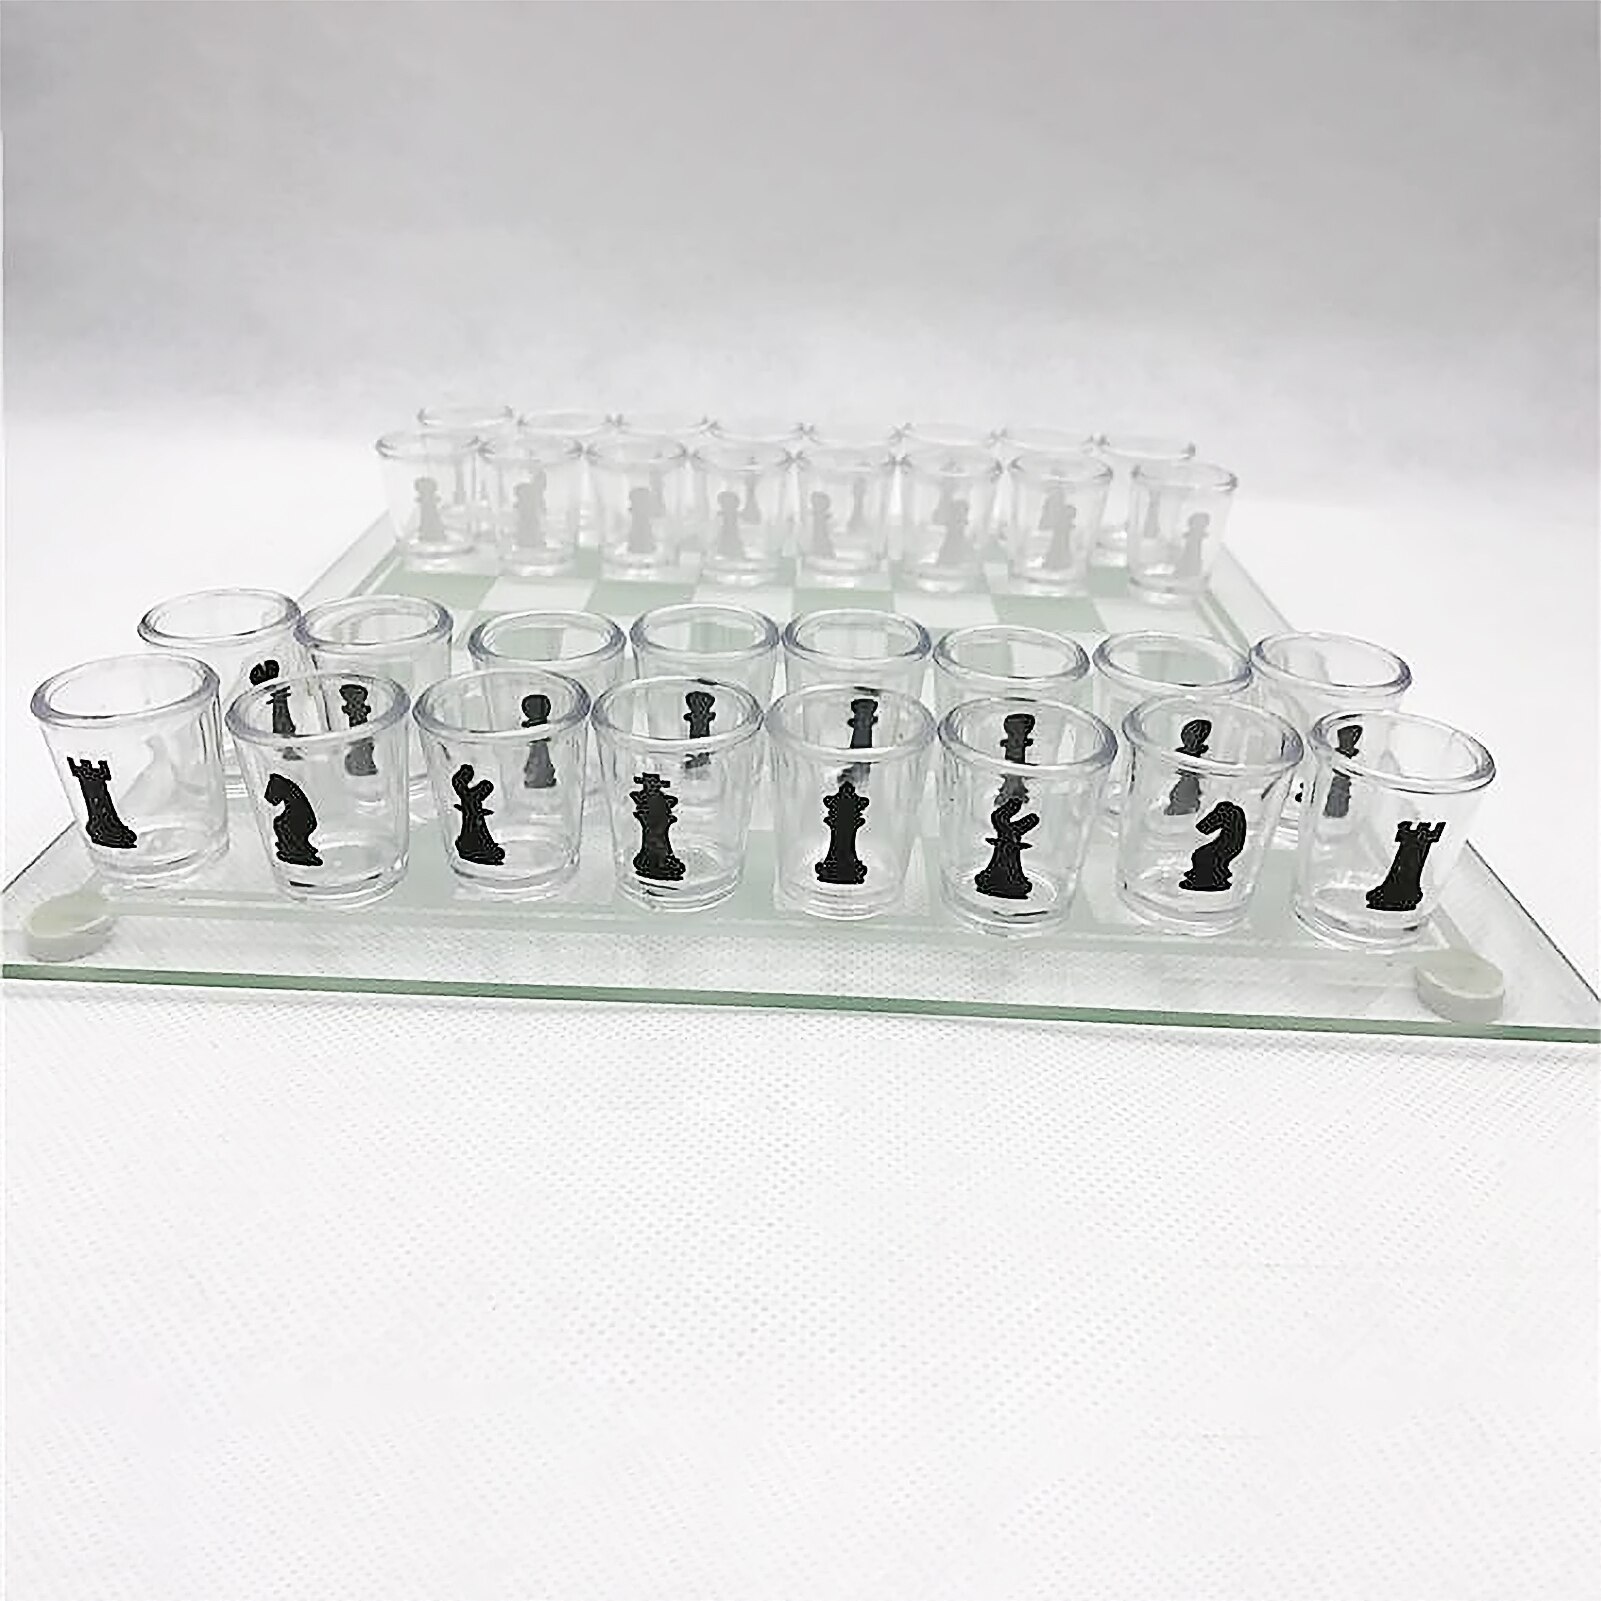 Small Shot Glass Chess Board Drinking Game Set Intelligent Interactive Exquisite Workmanship Interesting Toy For Travel Party